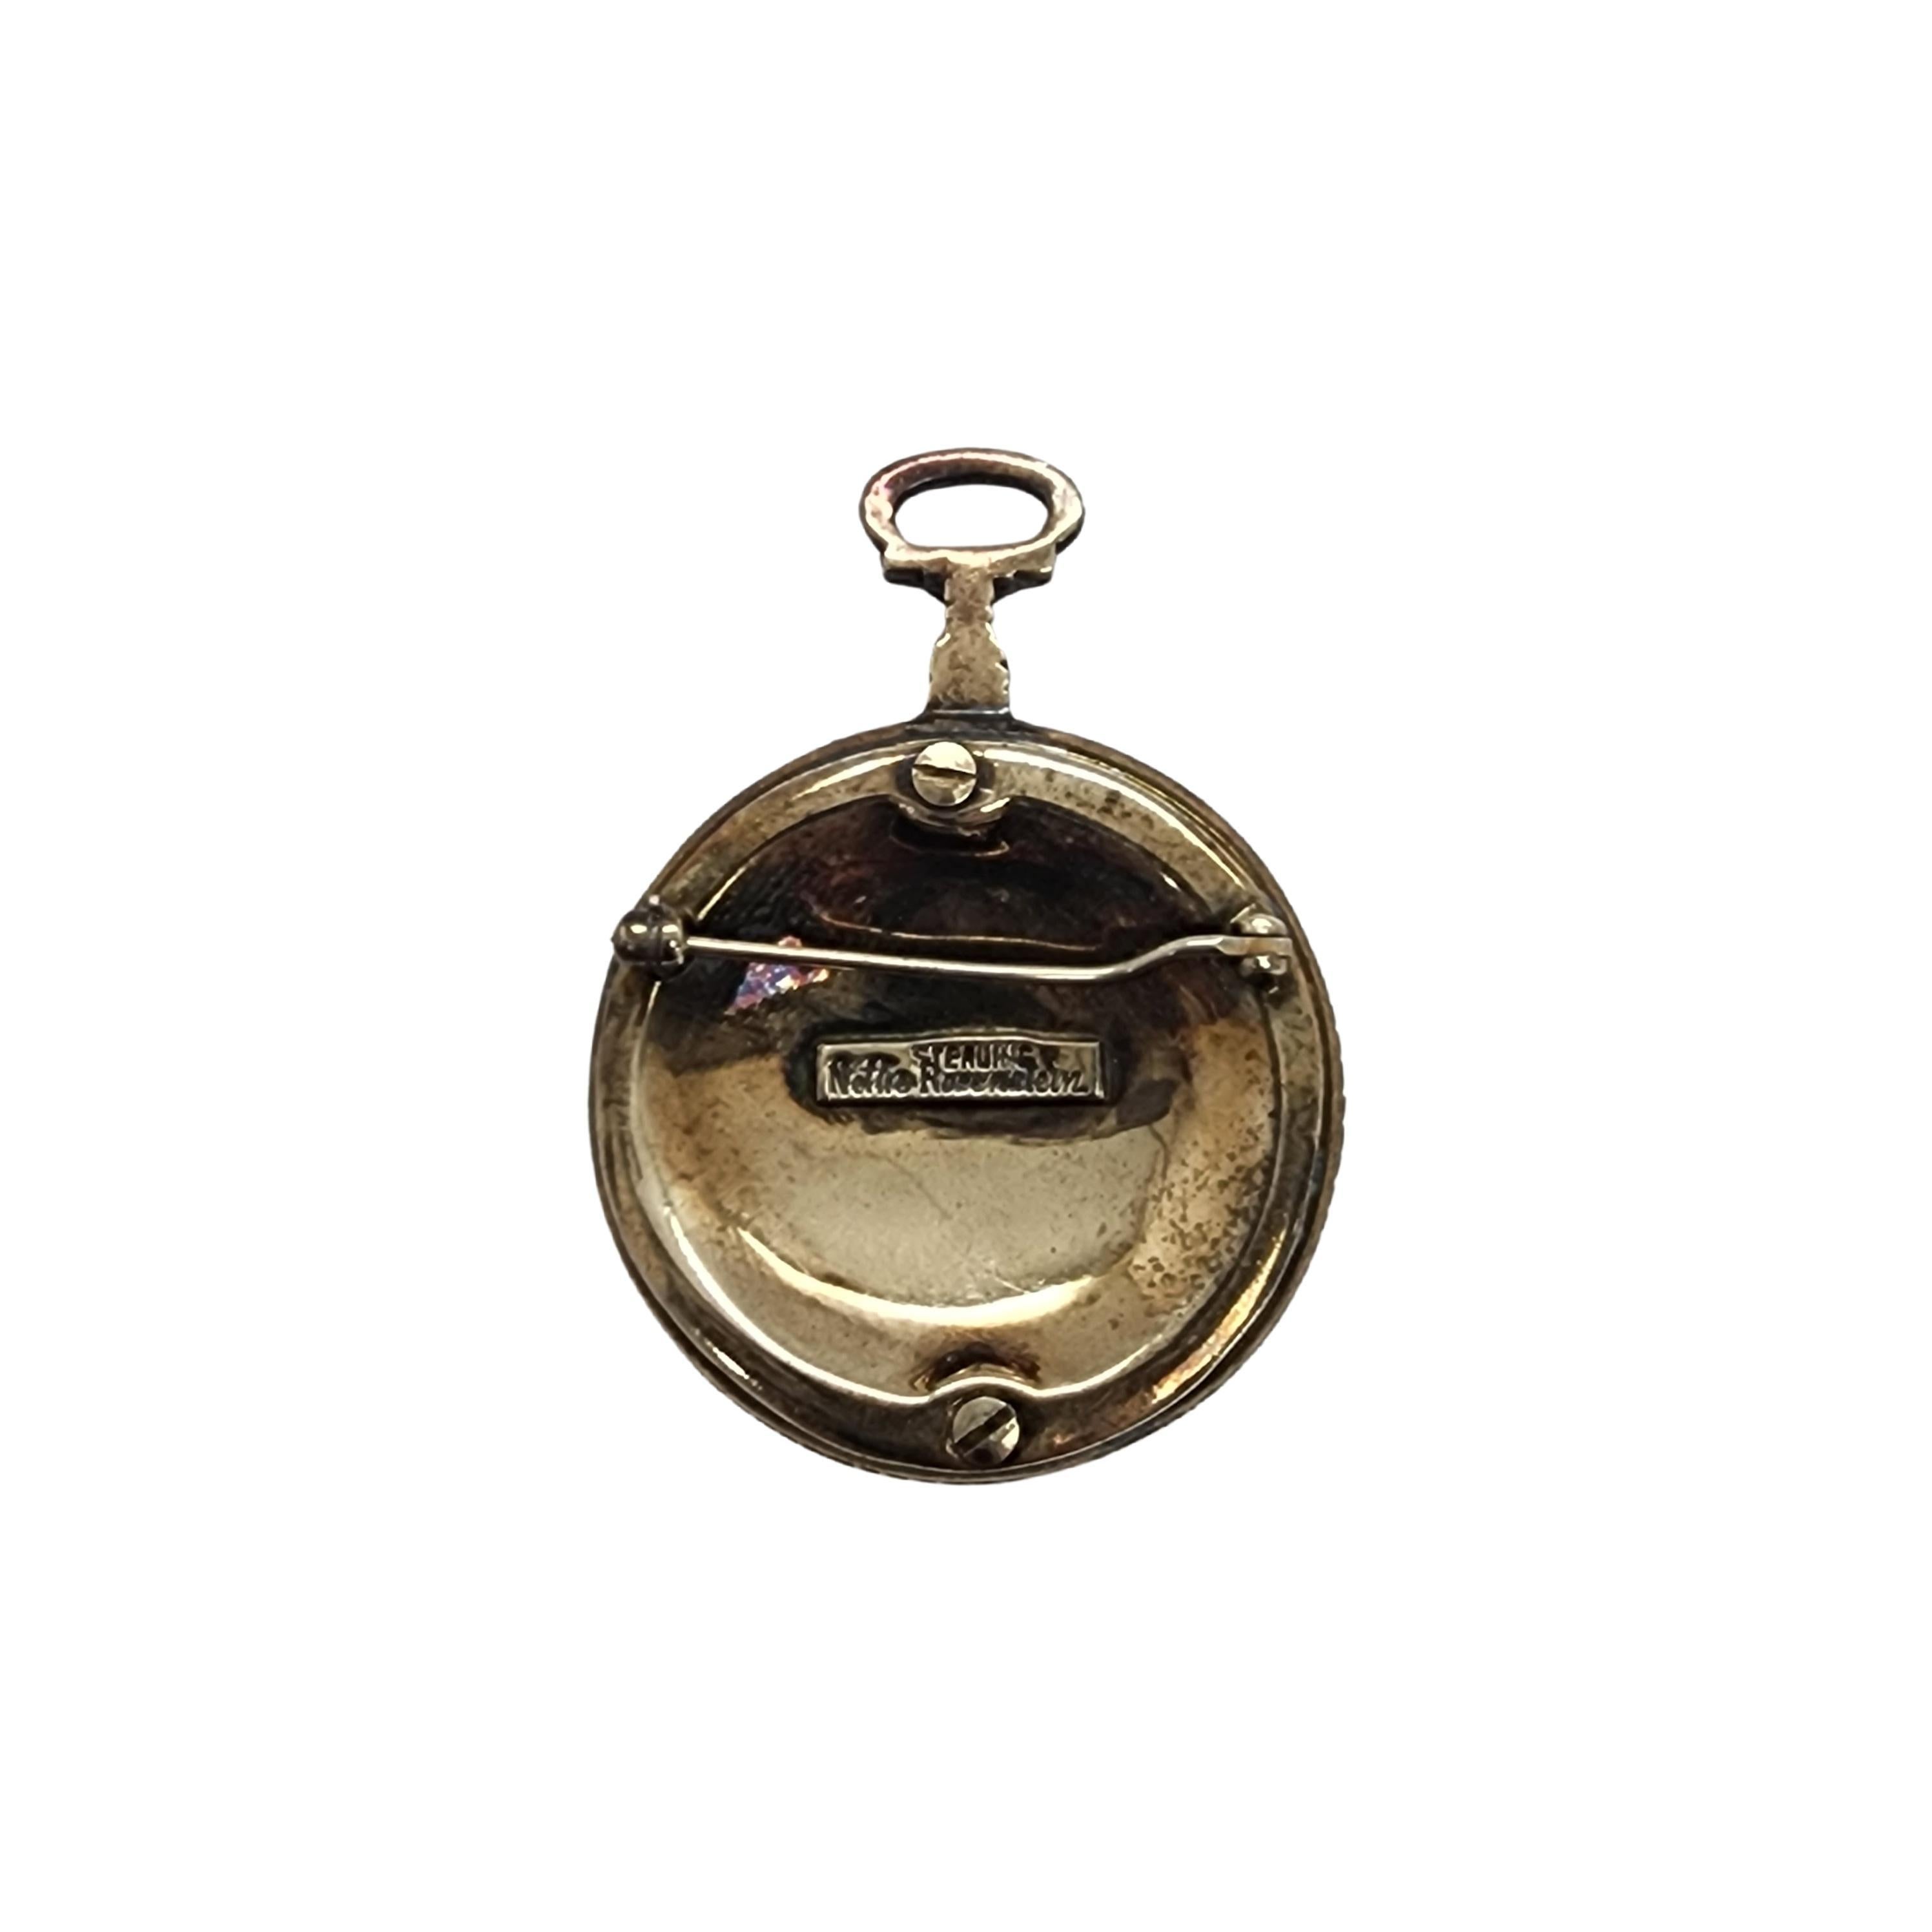 Gold vermeil over sterling silver flower watch fob pin by designer Nettie Rosenstein.

Beautifully detailed flower print is at the center of this watch fob design pin with clear and blue crystals surrounding the print set in gold vermeil sterling